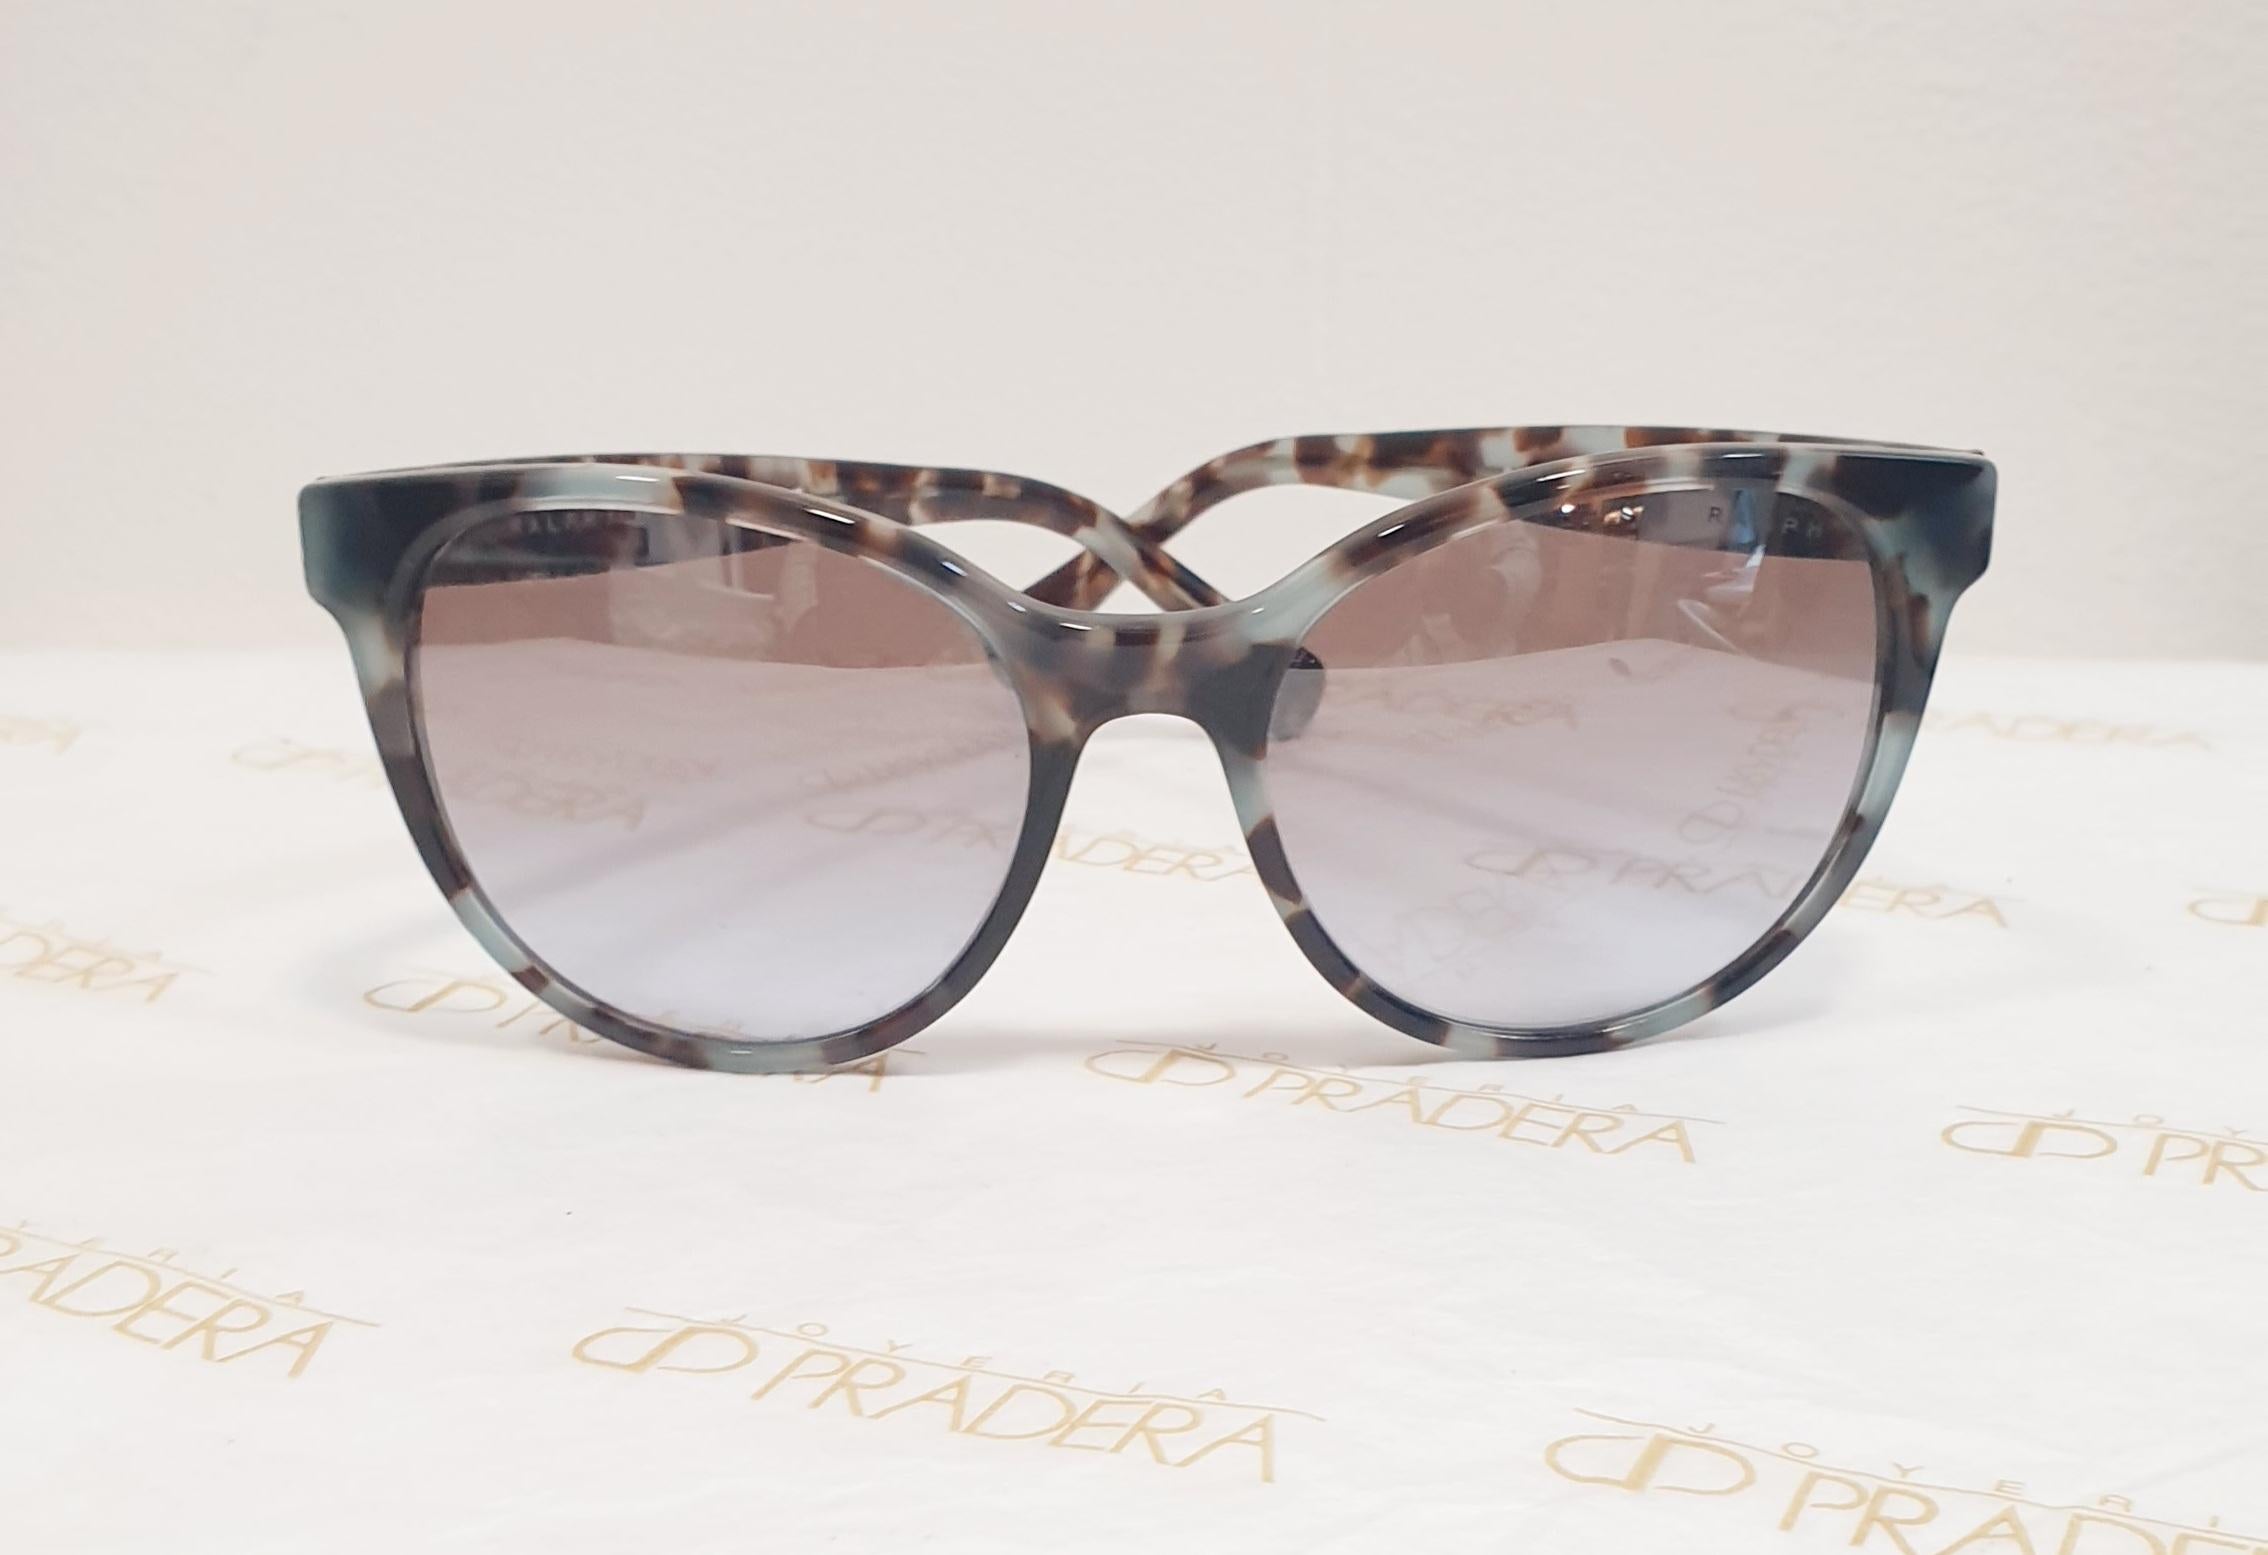 Sunglasses  RALPH RA5250 169294
RALPH RA5250 169294 sunglasses are ideal for a wide variety of personalities who stand out for their essence and have a predilection for good taste

Form: Butterfly
Gender: Woman
Lens colour: Violet Grad Brownmirror